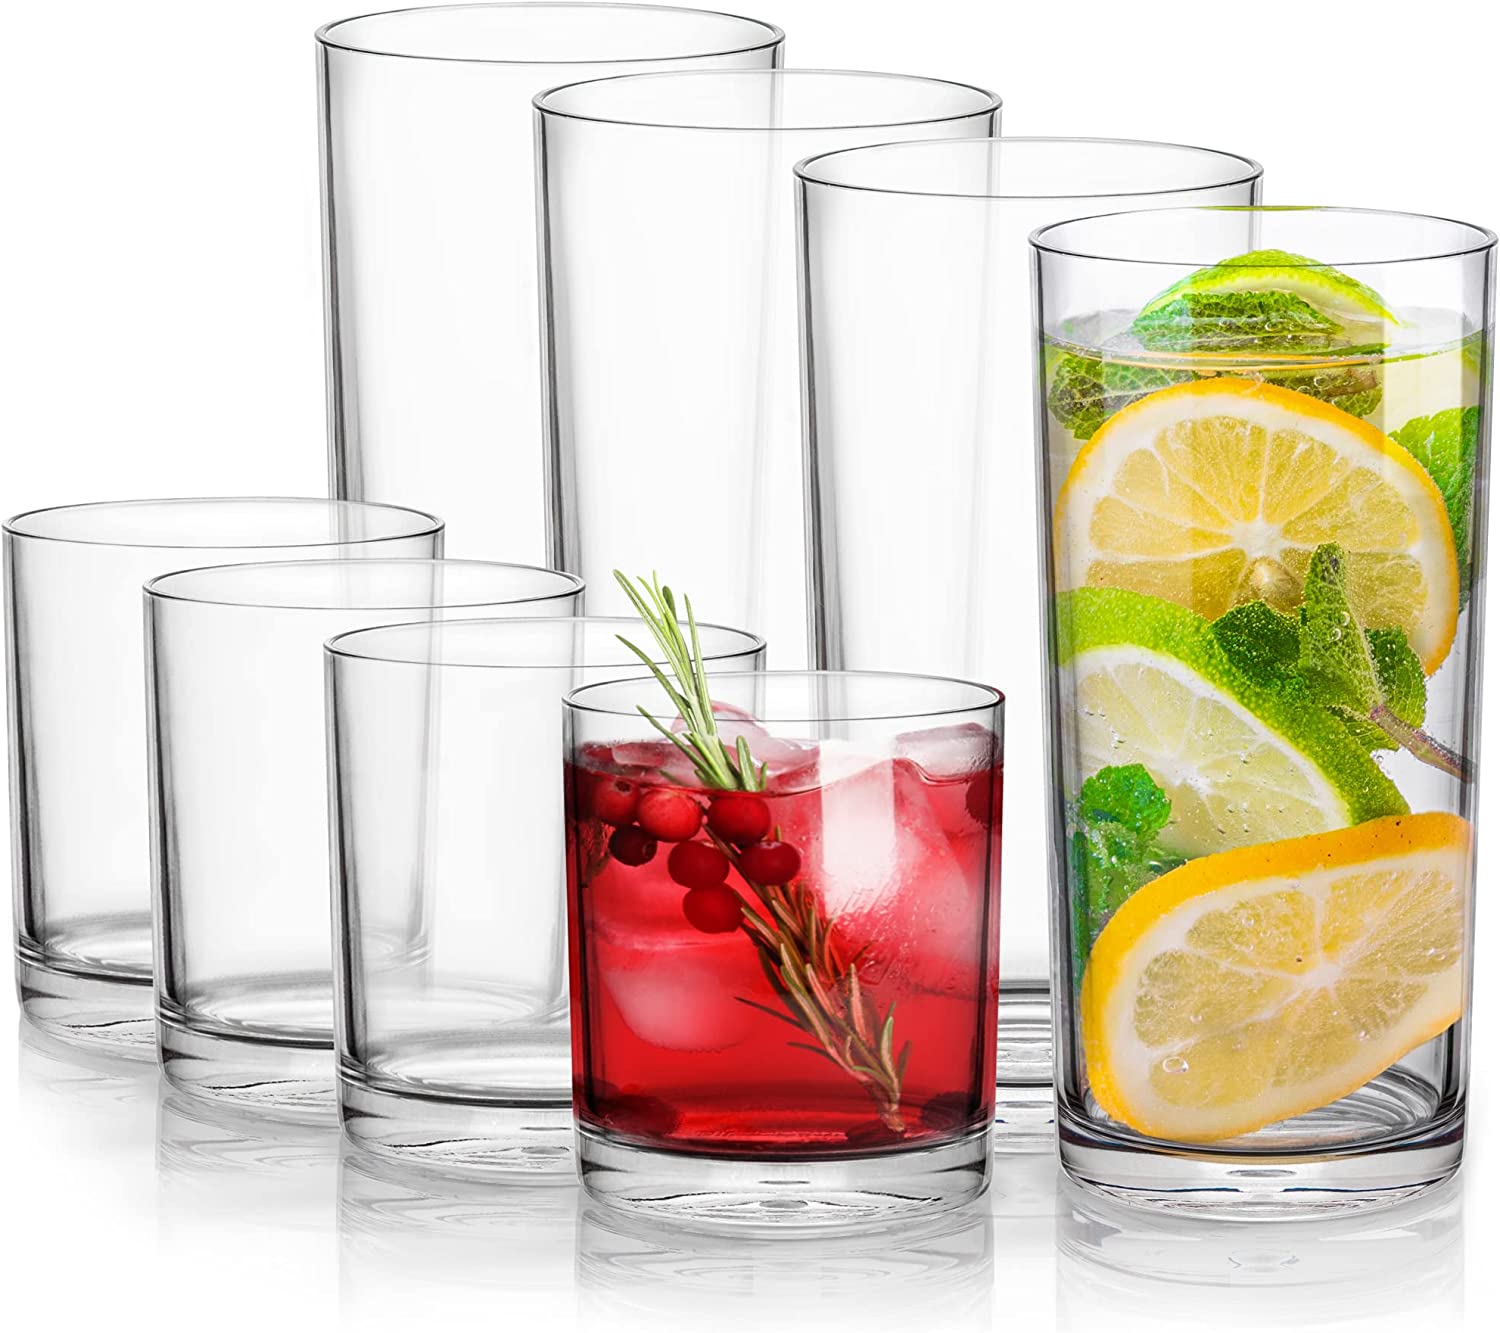 CUKBLESS Drinking Glasses Set of 6, Crystal Highball